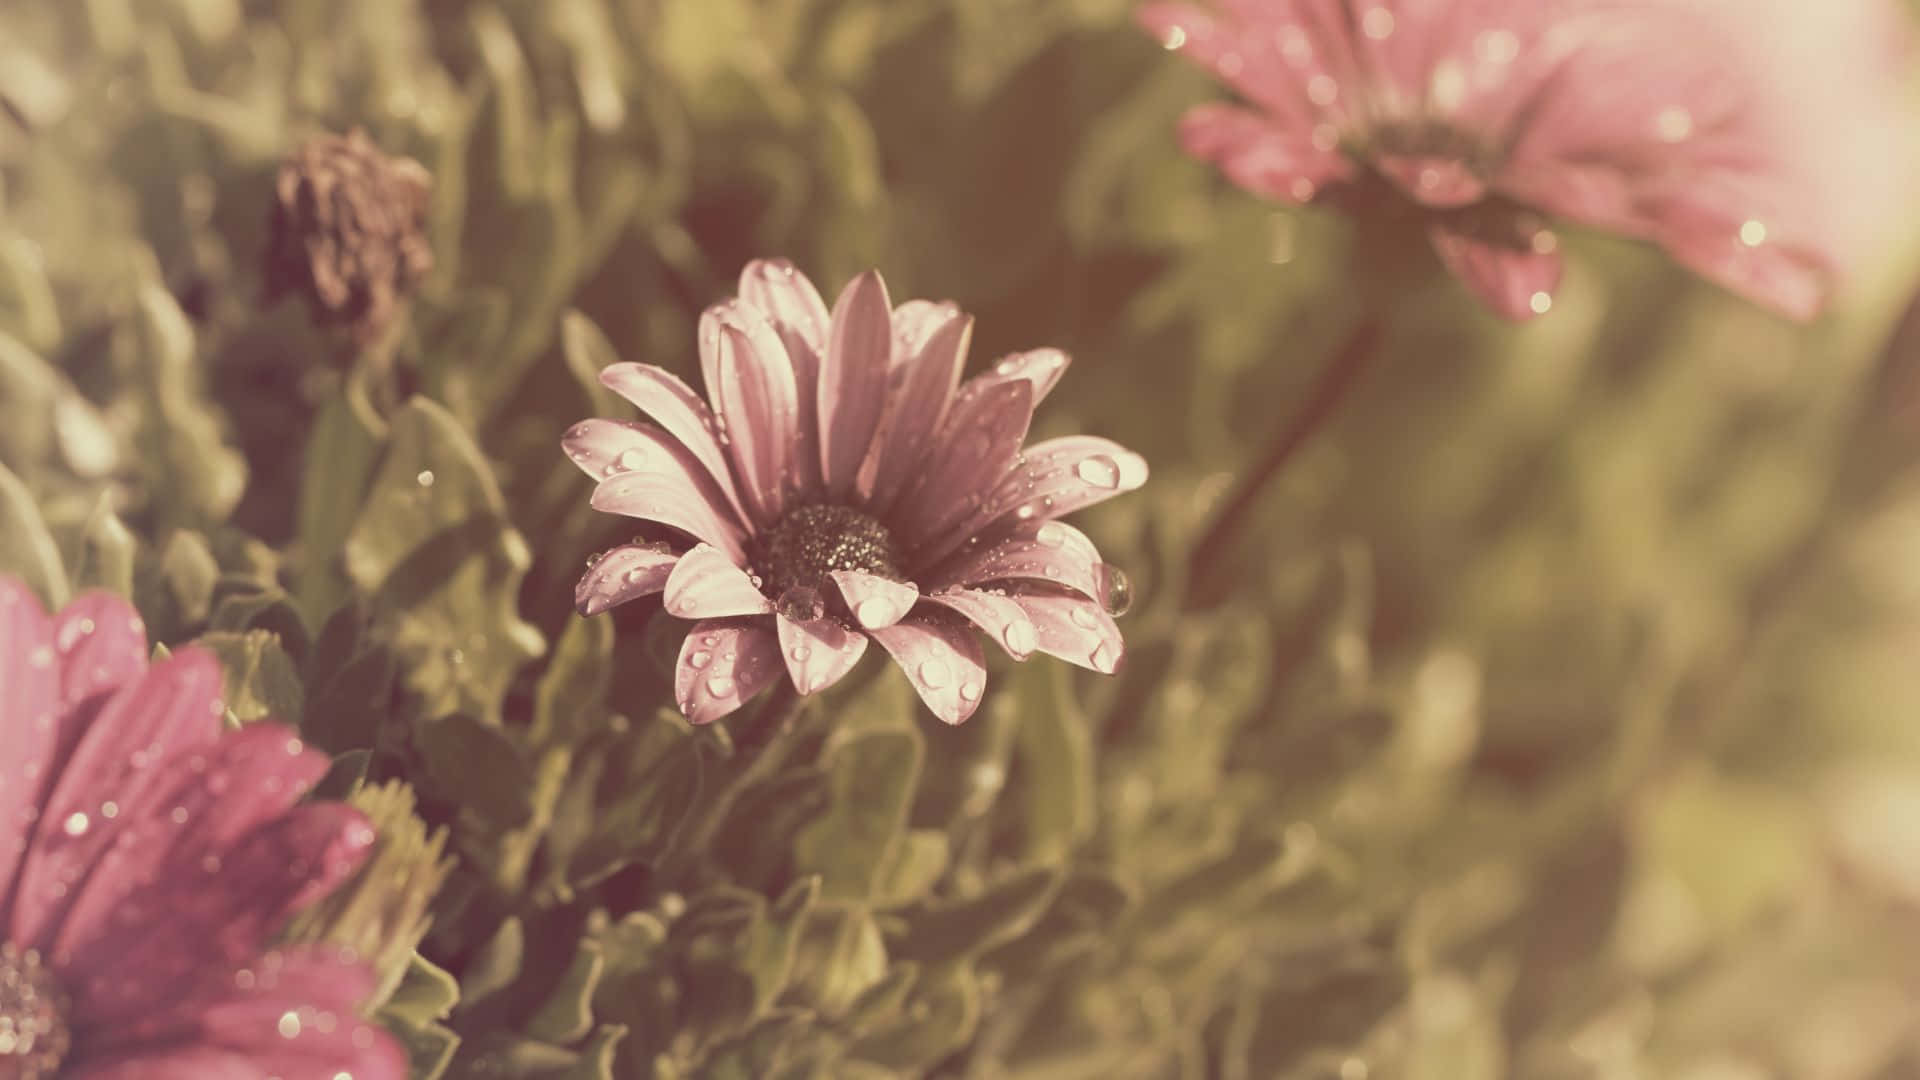 A Beautiful Vintage Flower on a Rustic Background